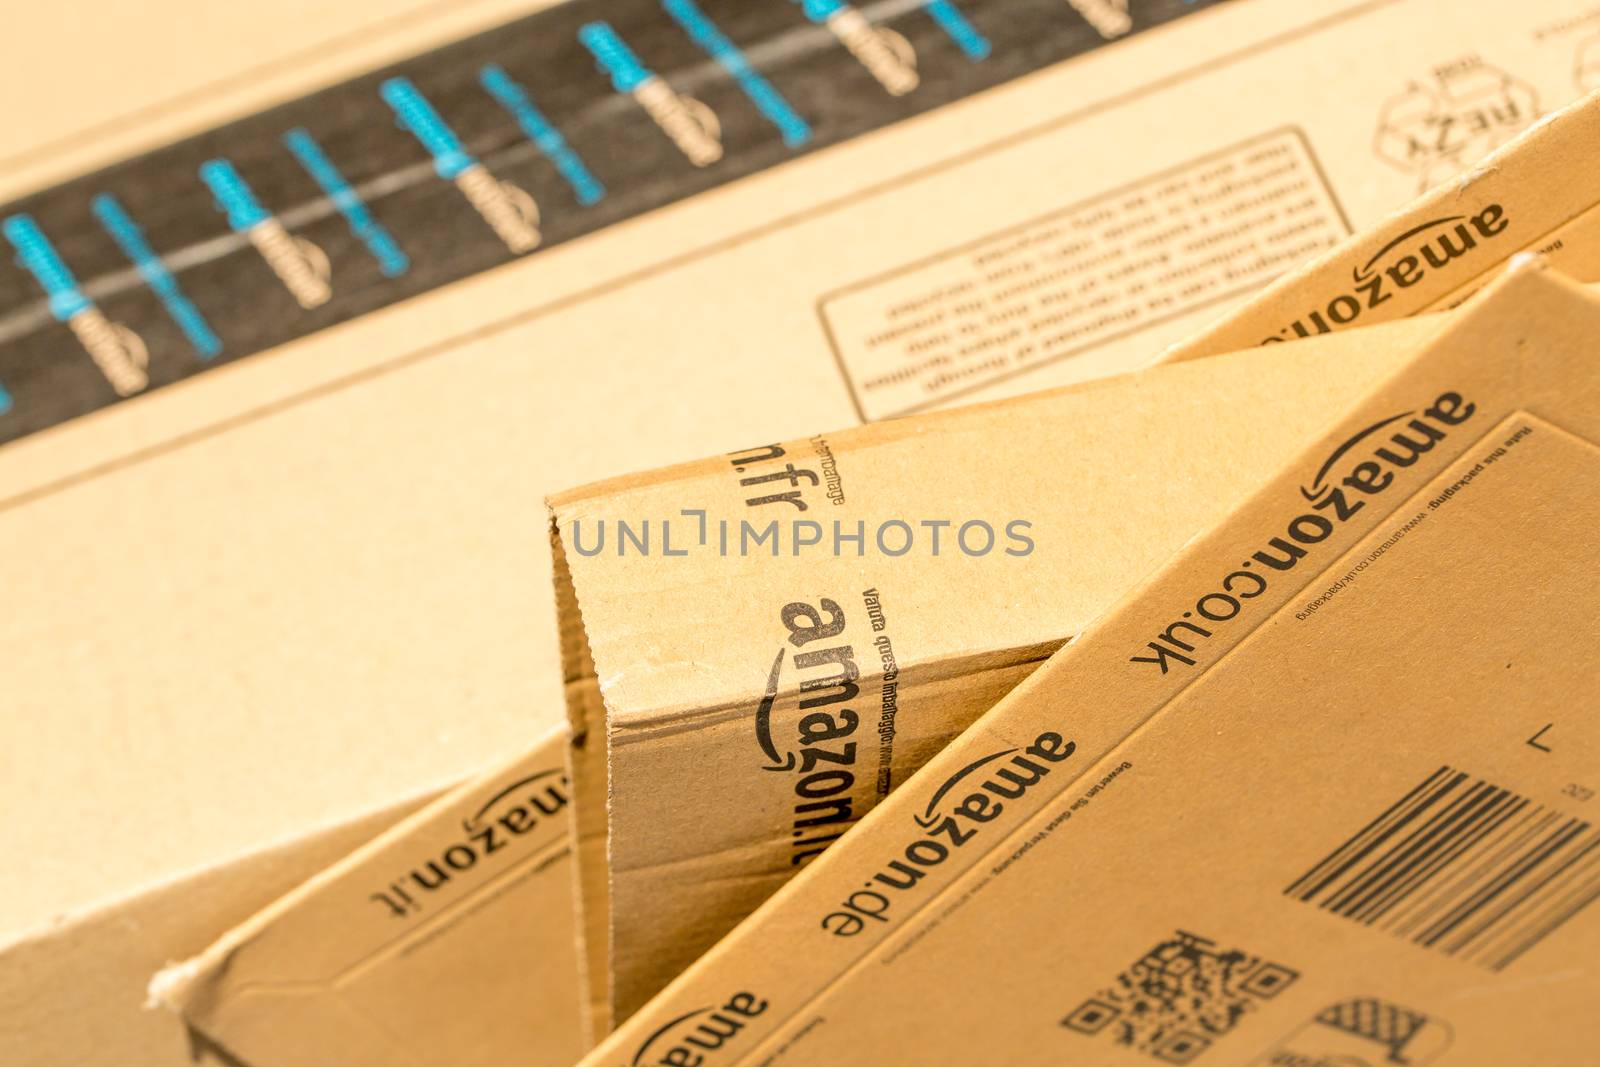 Paris, France - February 08, 2017: Amazon Prime Parcel Packages closeup. Amazon, is an American electronic commerce and cloud computing company,based in Seattle, Started as an online bookstore, Amazon is become the most importrant retailer in the United States